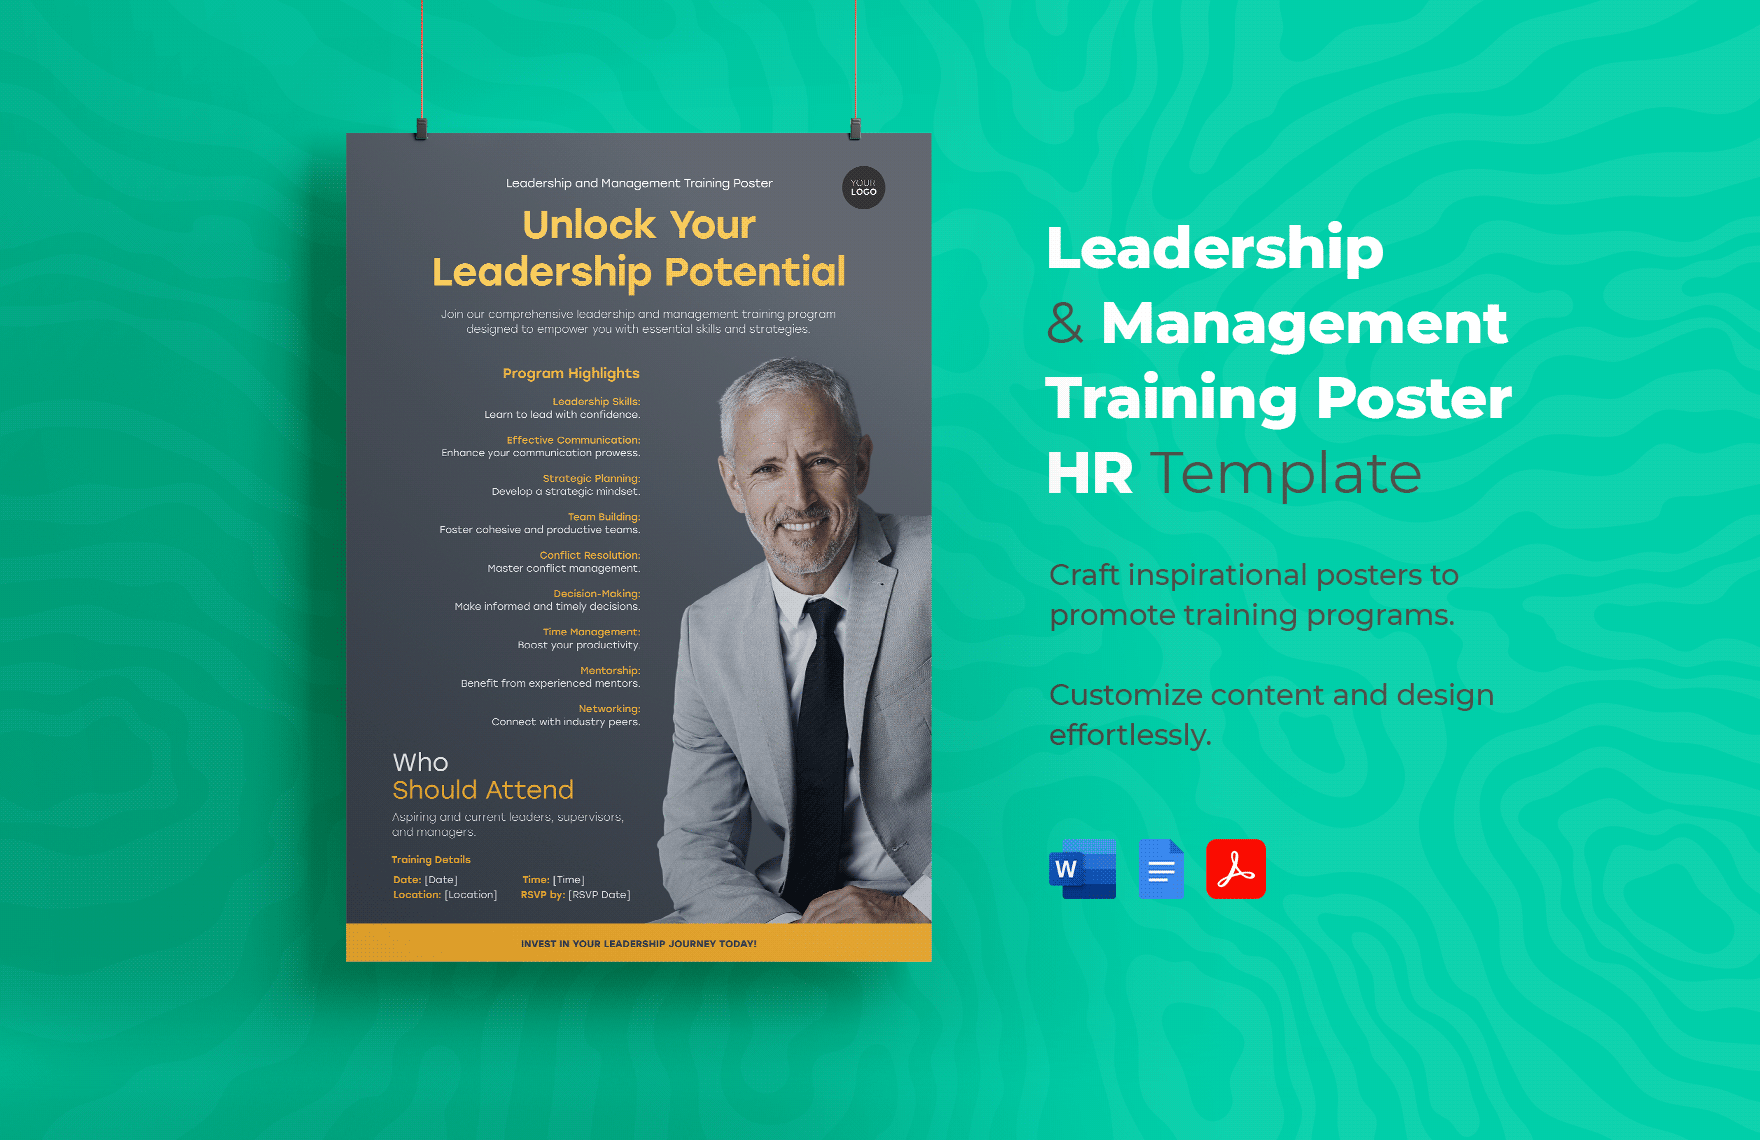 Leadership and Management Training Poster HR Template